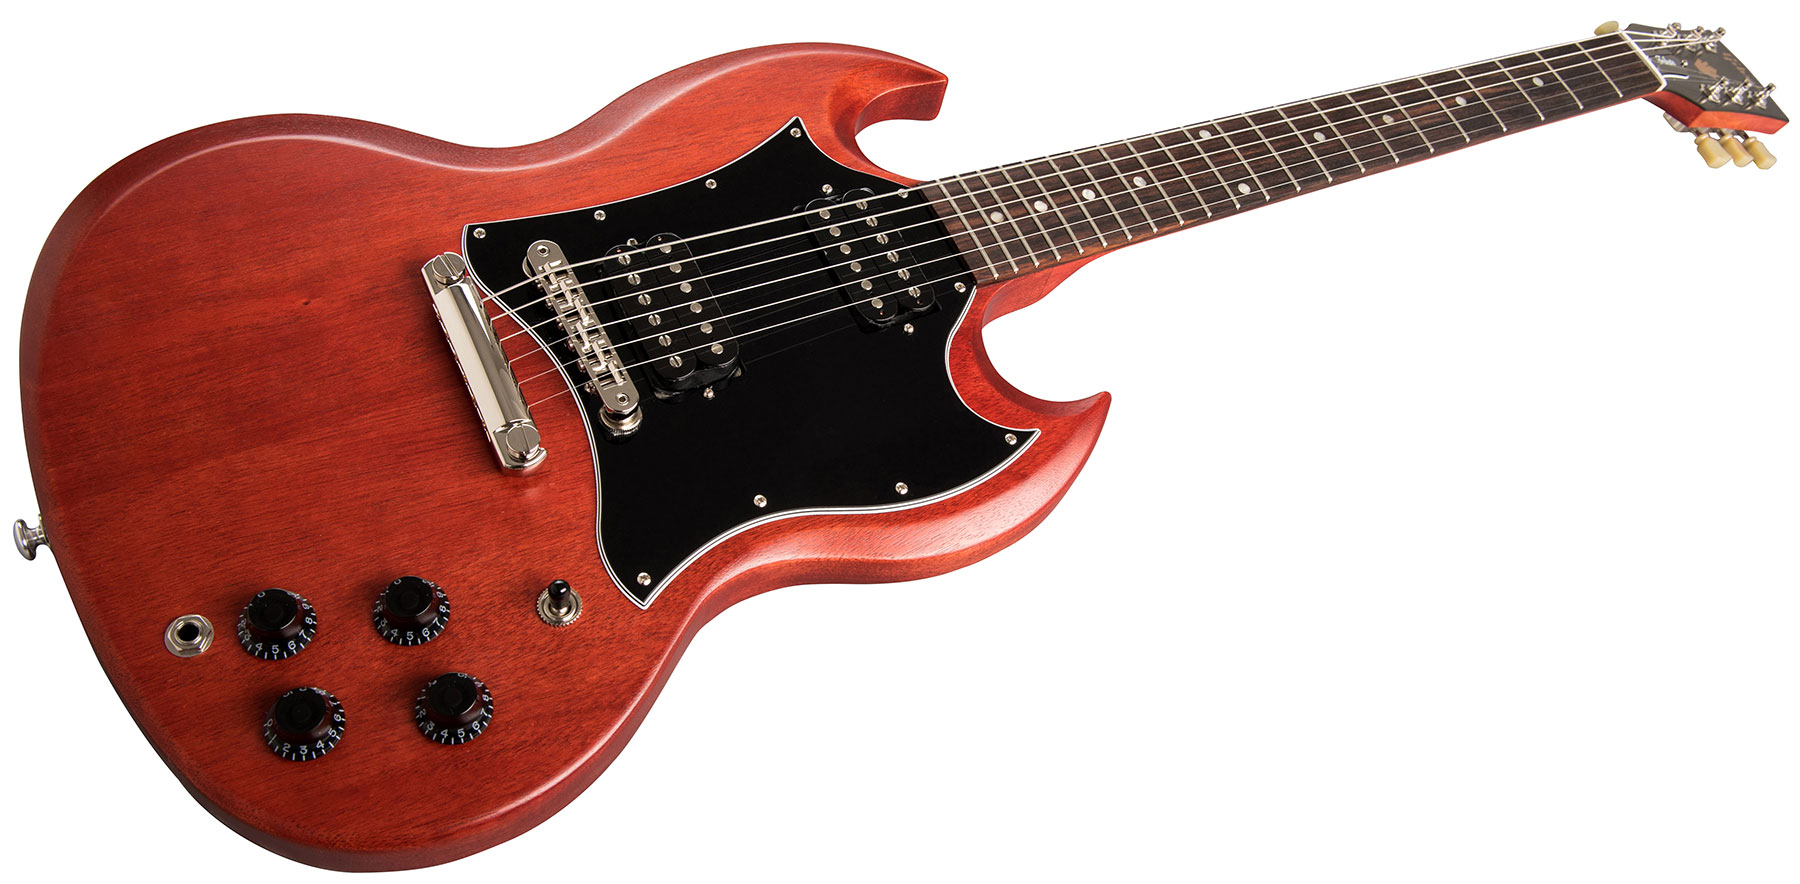 Gibson SG Standard Tribute - vintage cherry satin Double cut